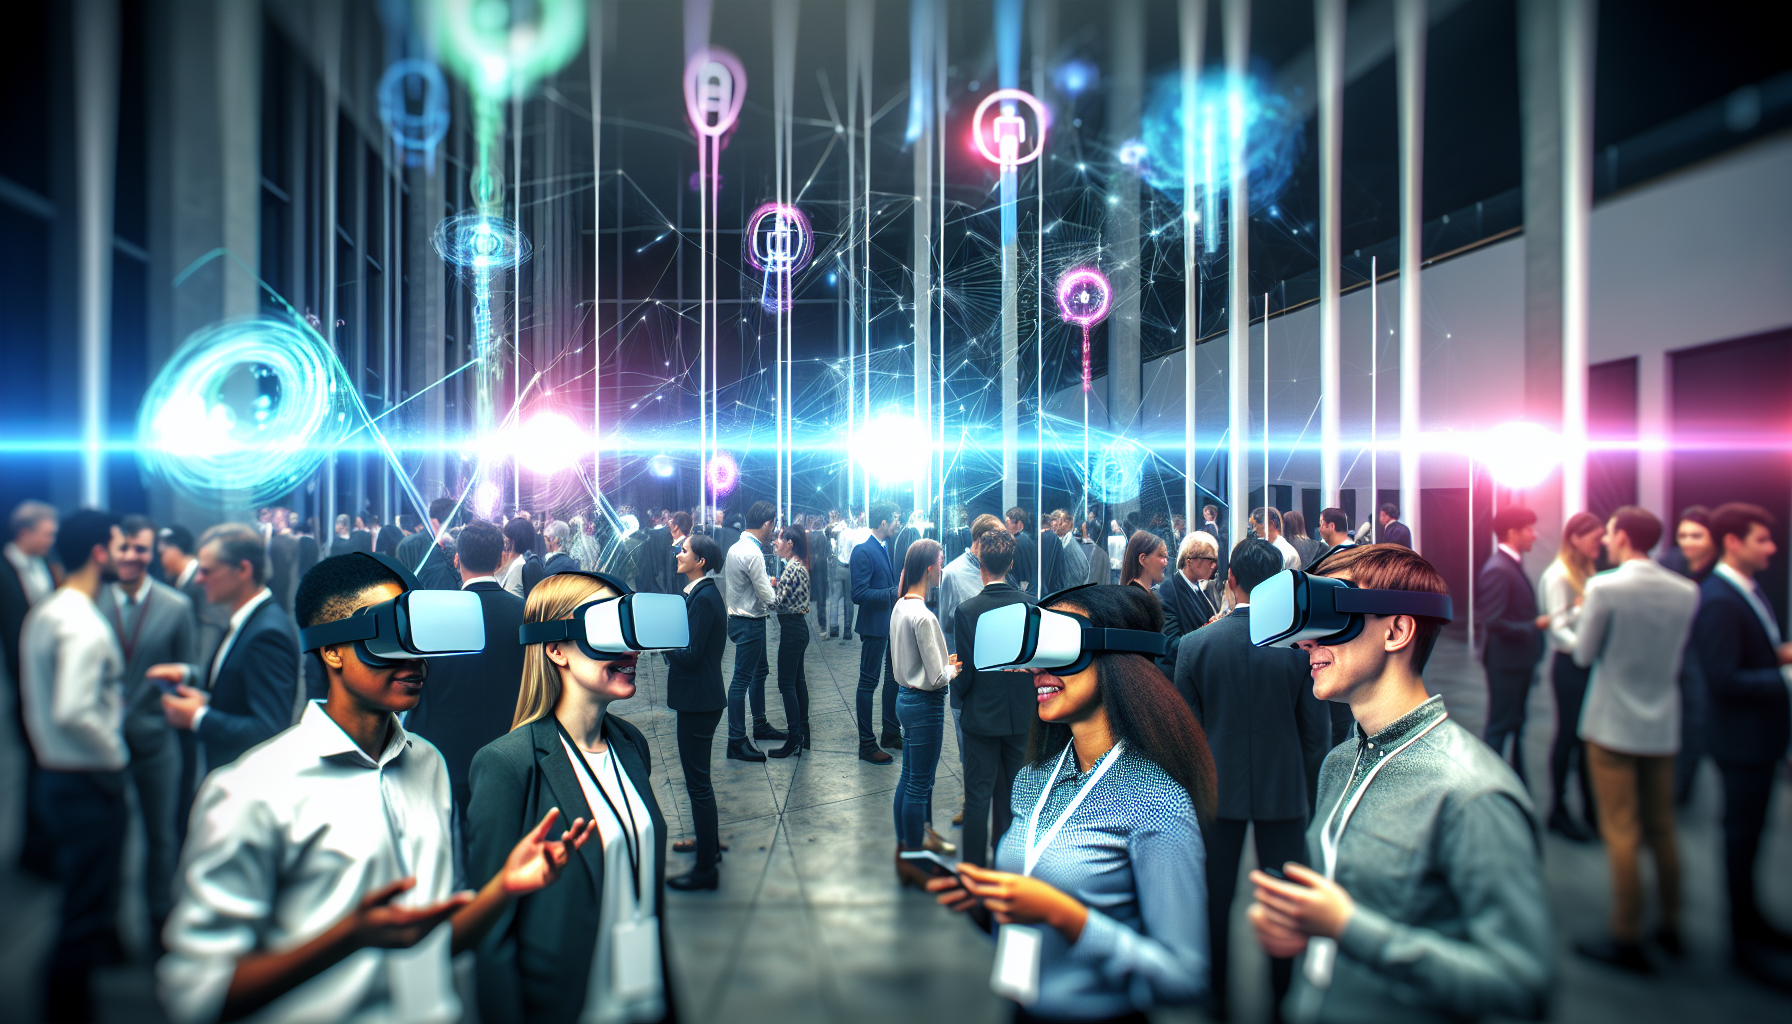 A forward-looking networking event with virtual reality elements